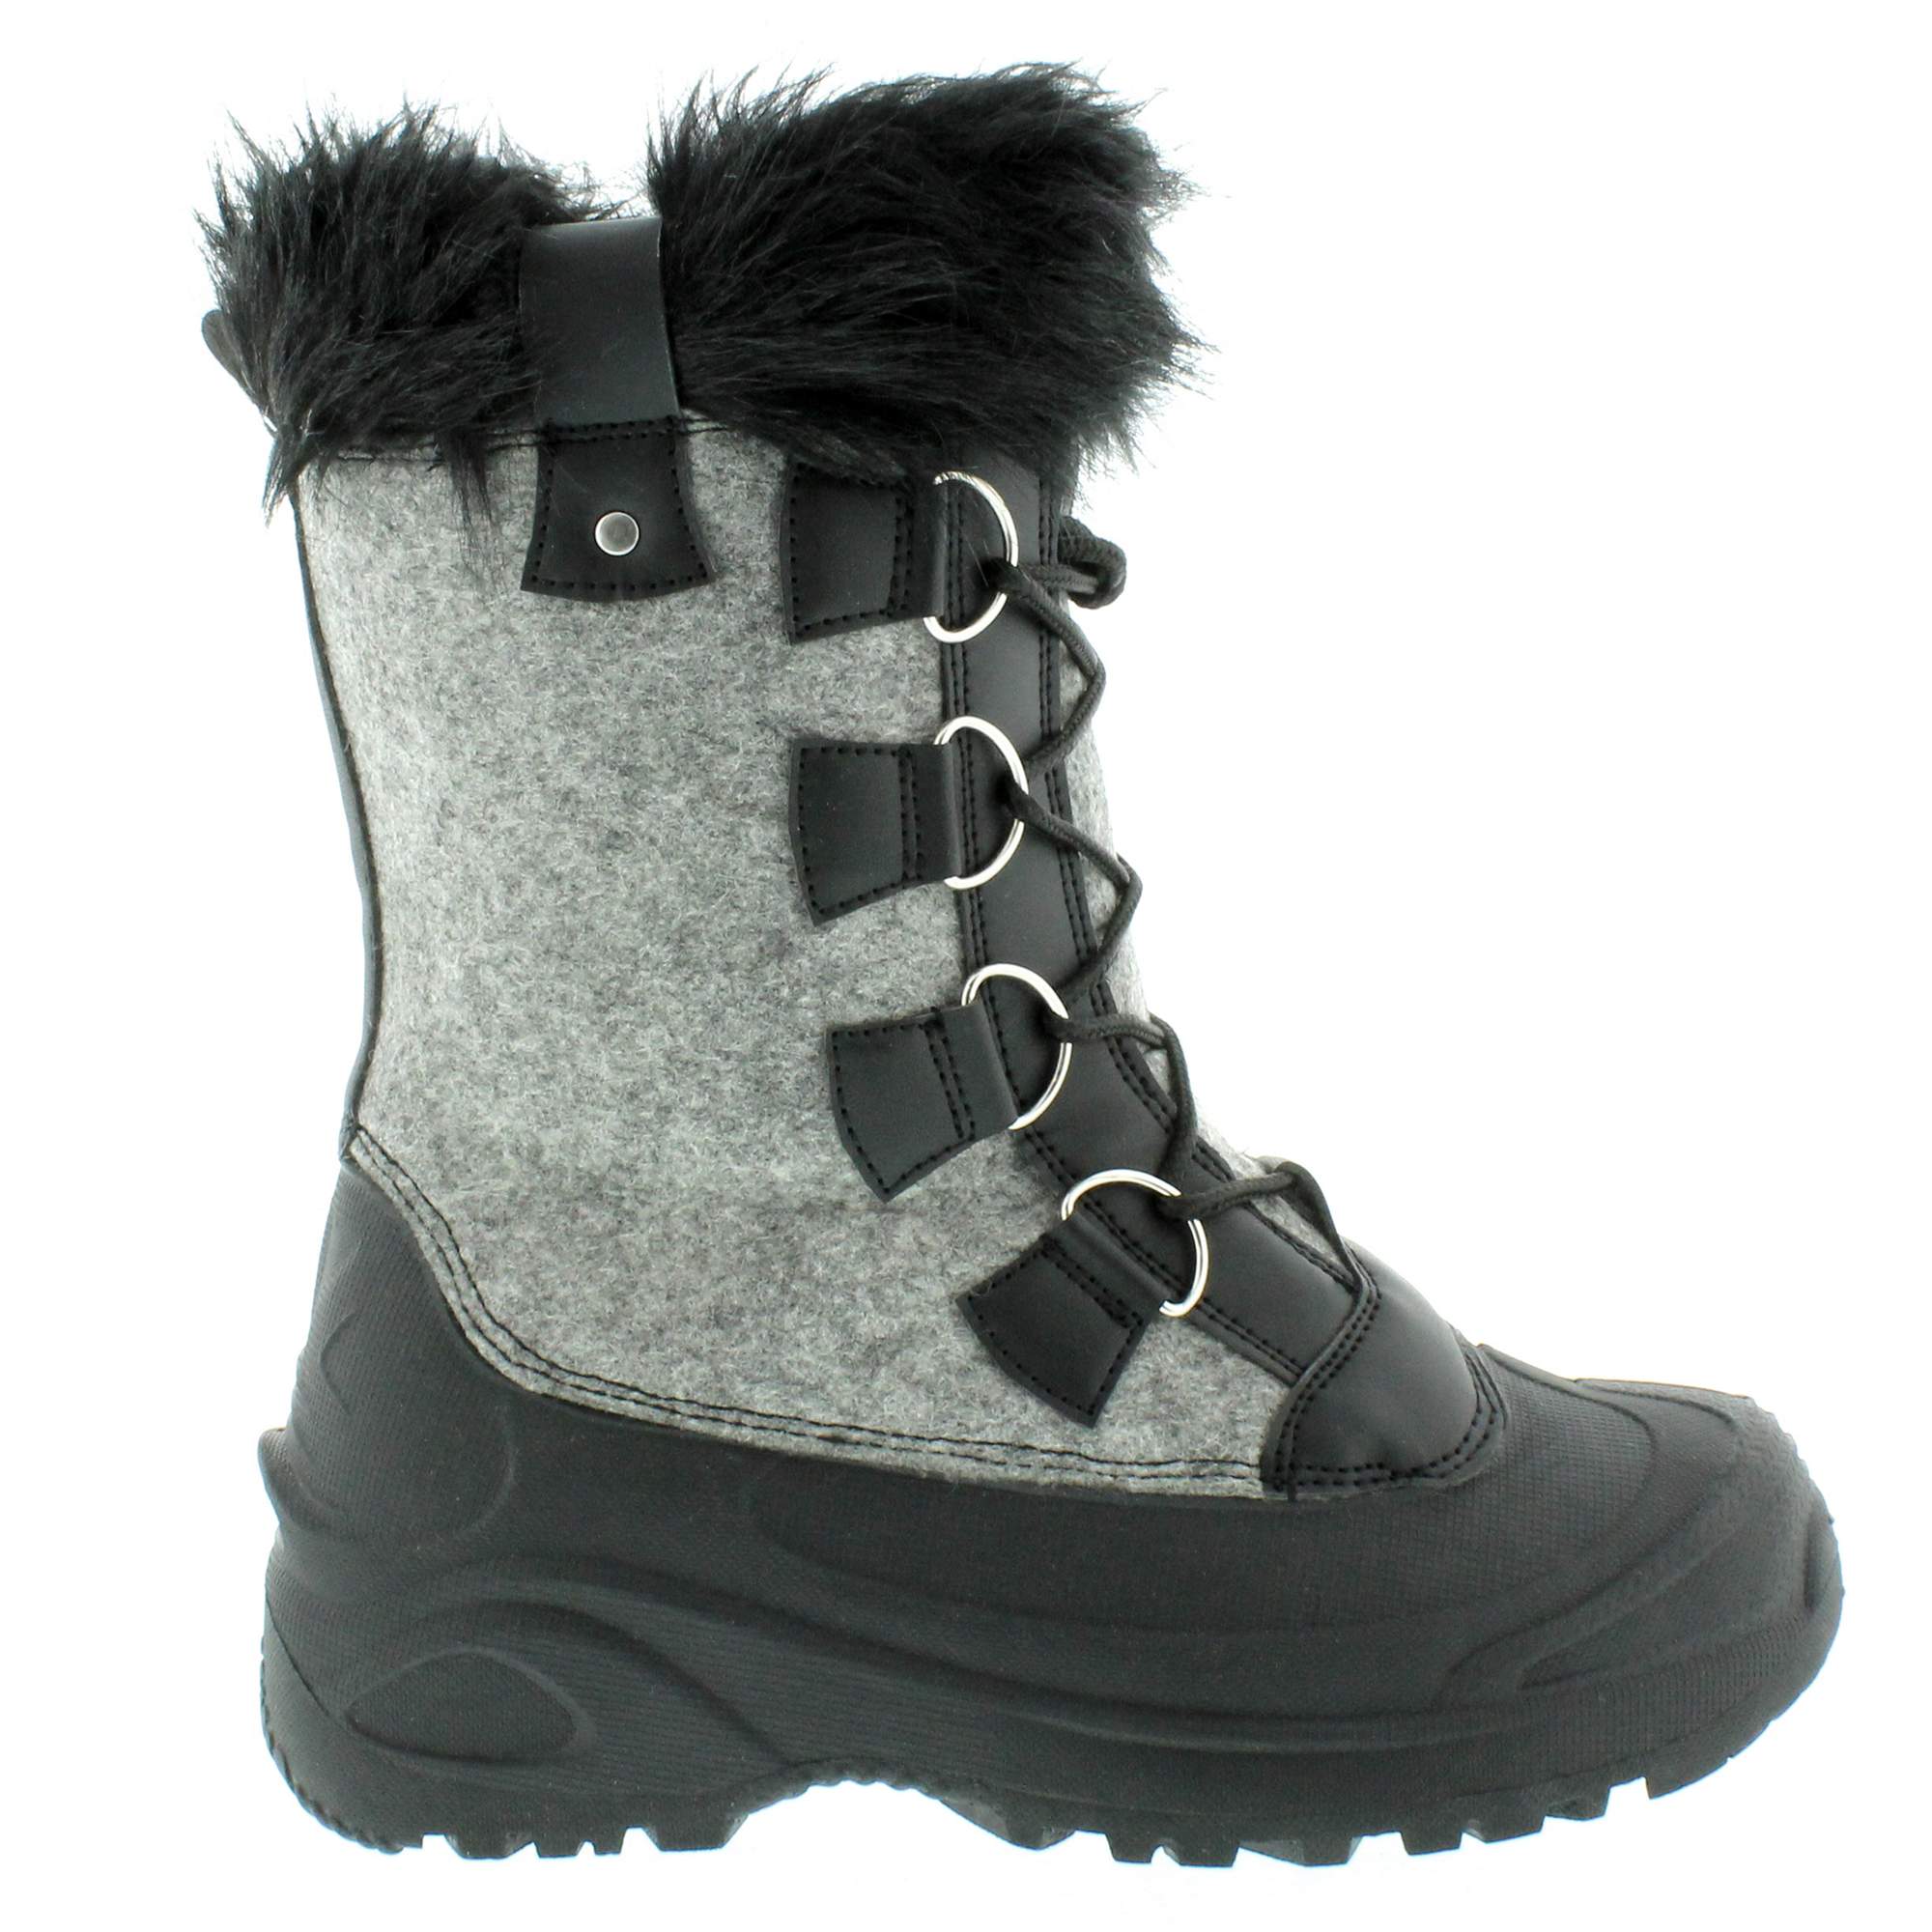 Cold Front Women's Snow Lodge Winter Boot - image 1 of 4